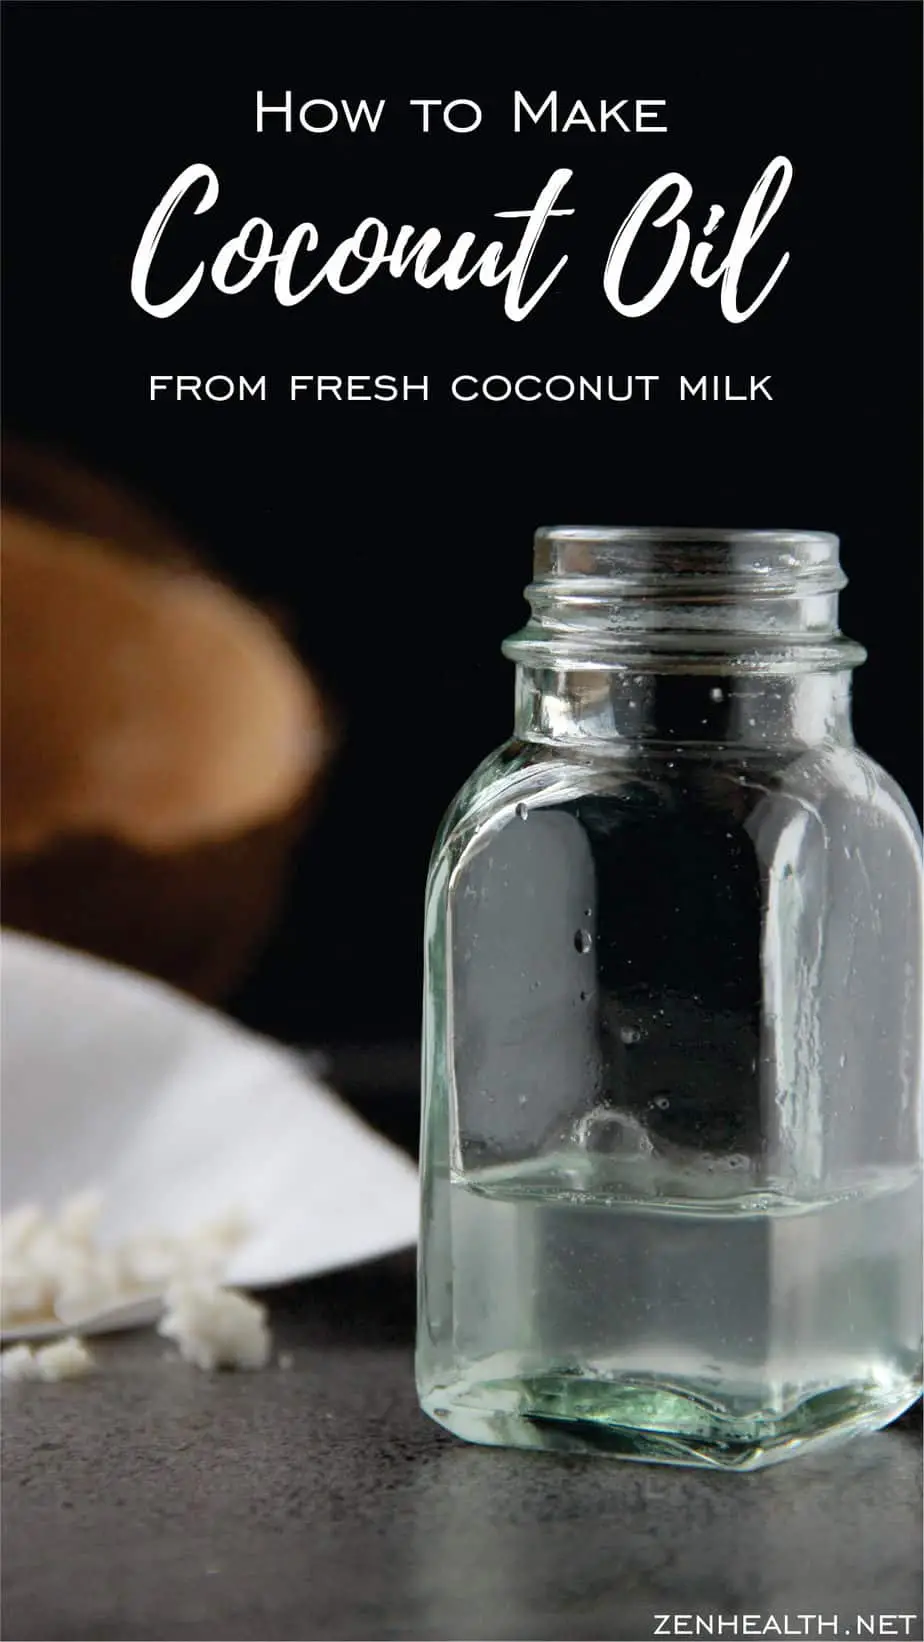 How to Make Coconut Oil from Fresh Coconut Milk